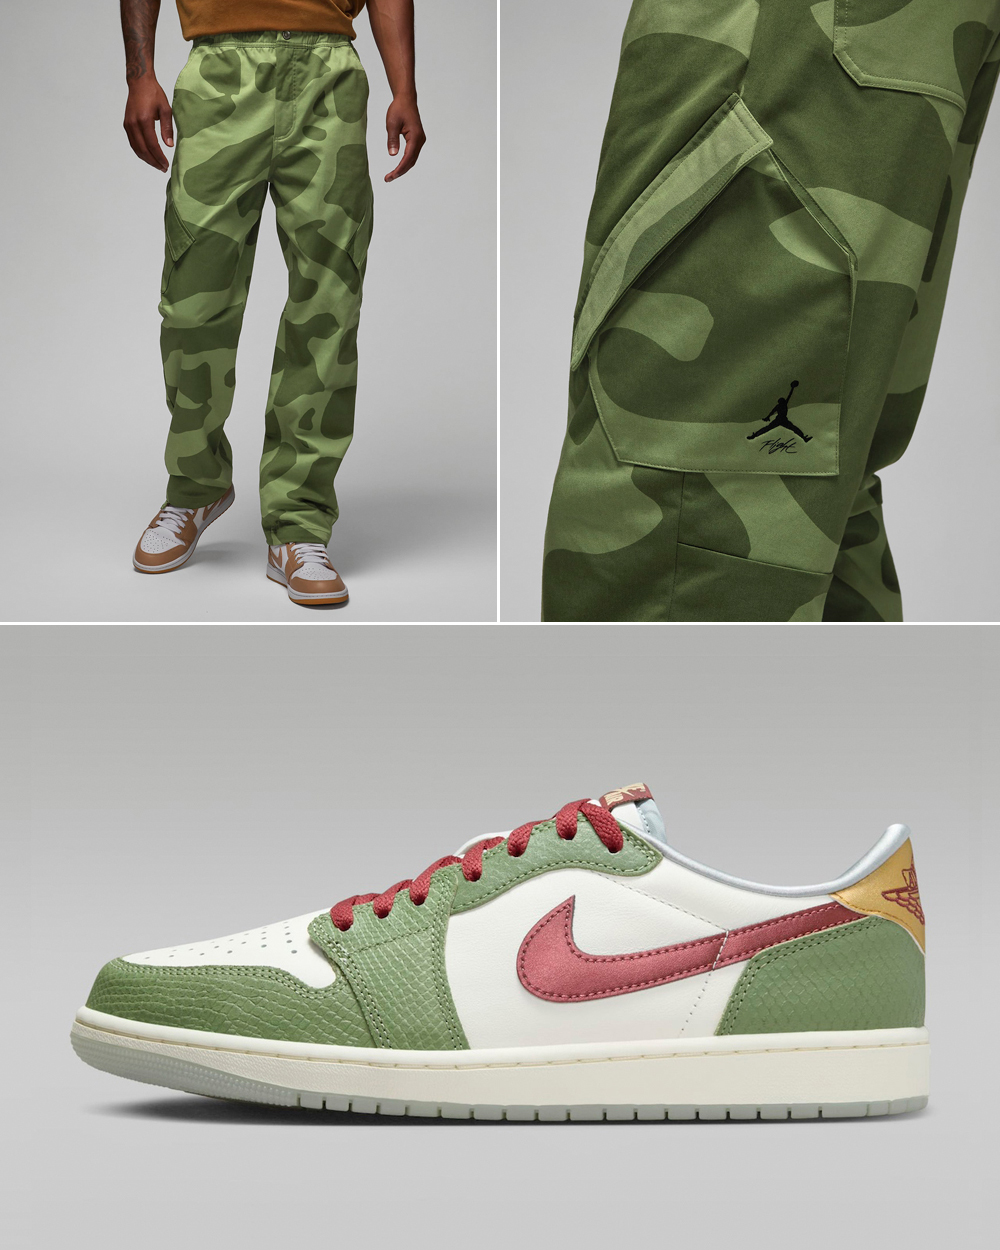 Air-Jordan-1-Low-OG-Year-of-the-Dragon-Chinese-New-Year-Pants-1